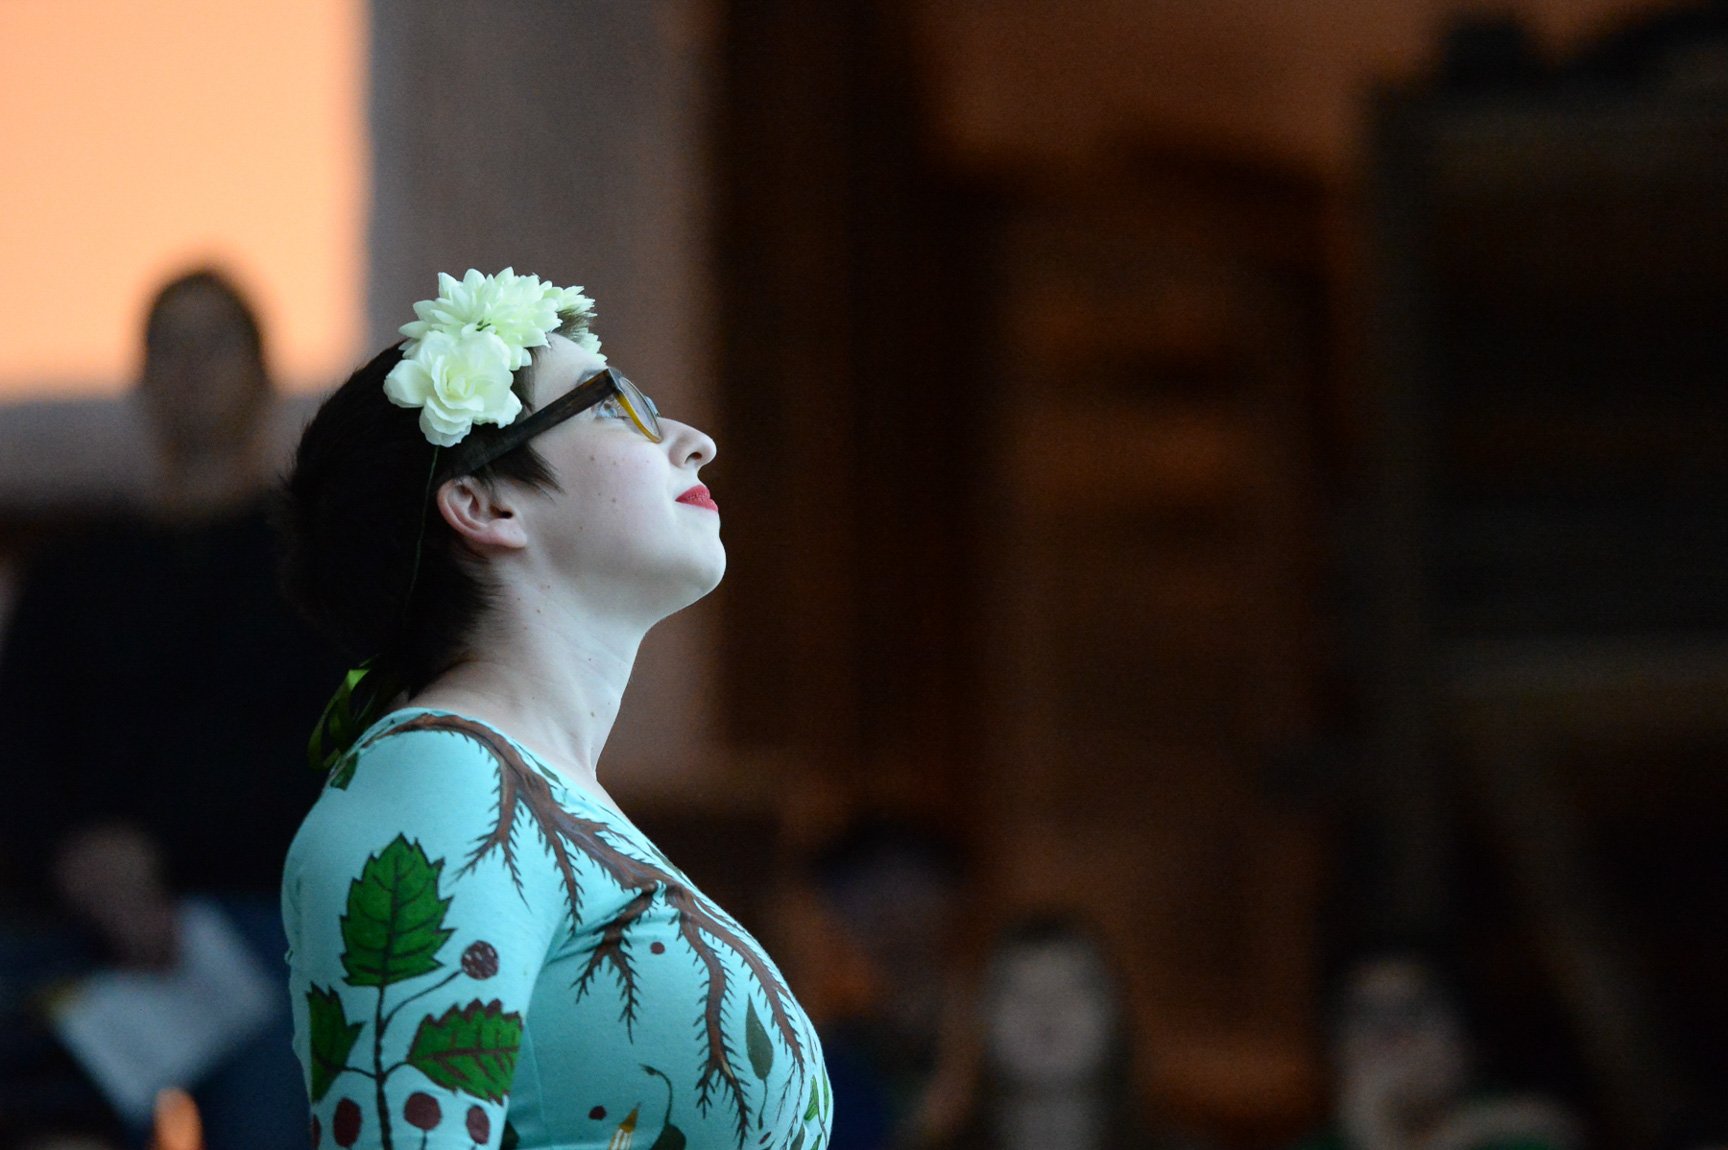 A presenter wearing a flower crown looks up at a bright image projected on the Main Staircase wall.